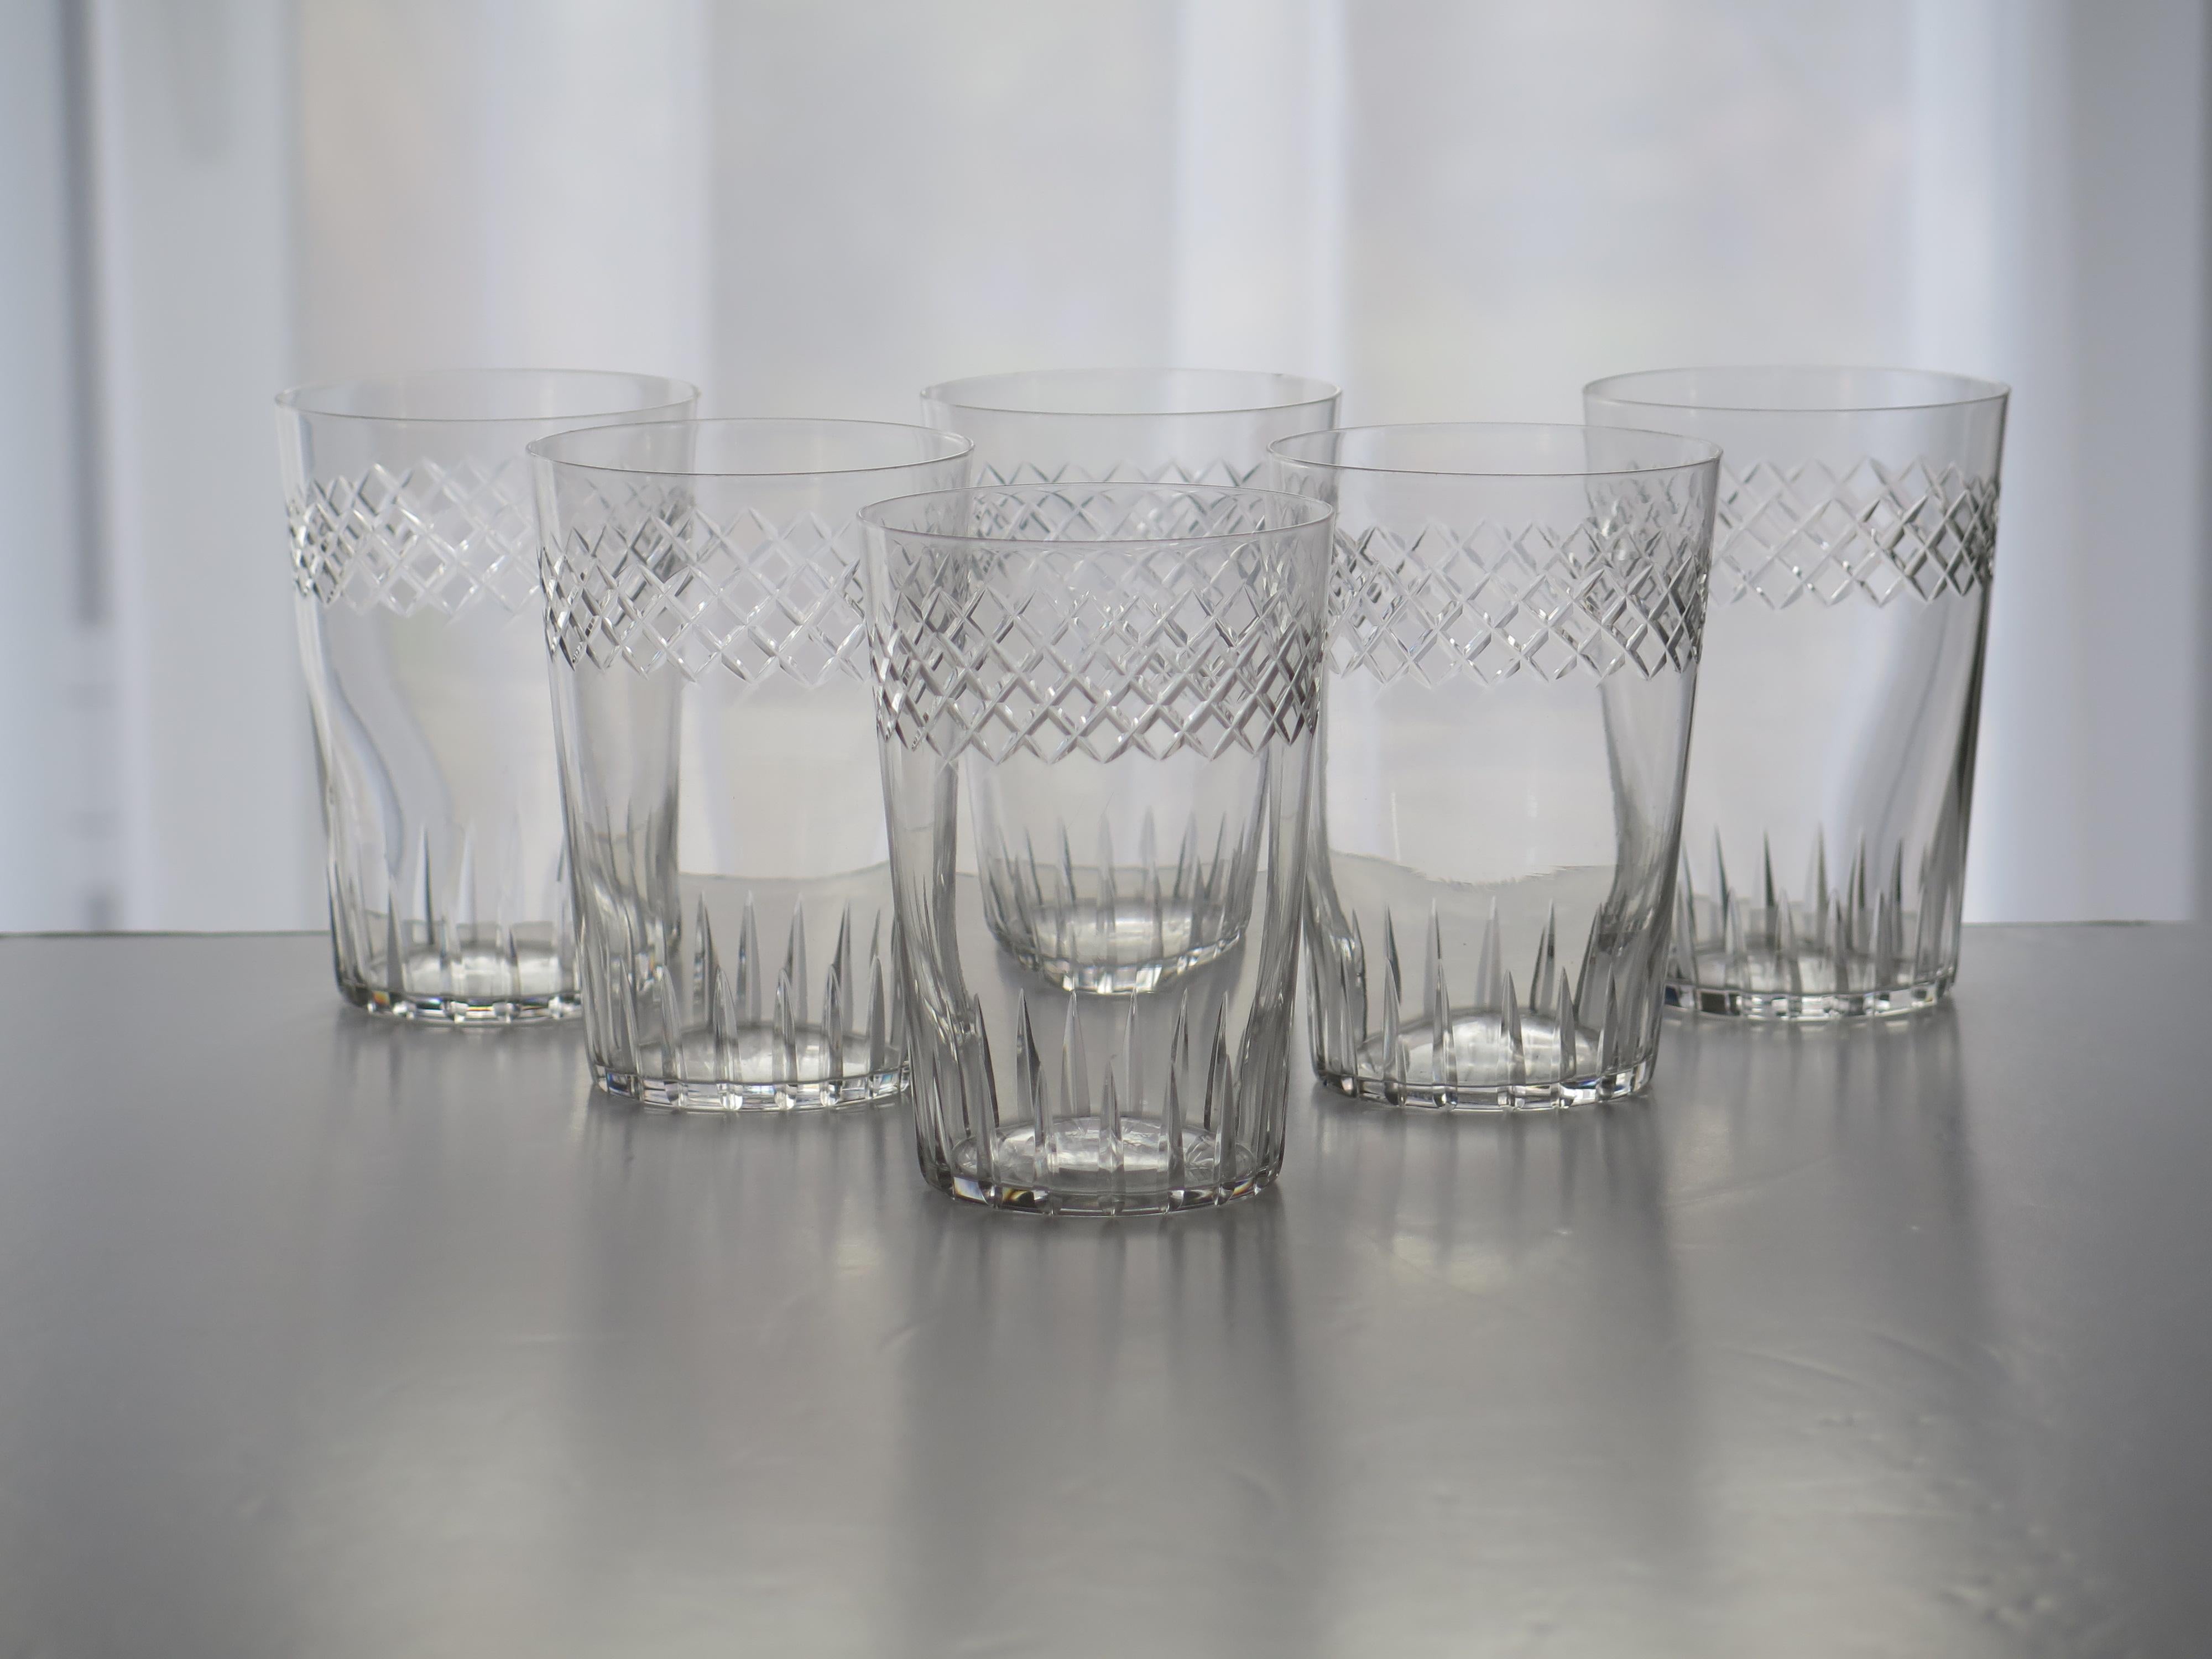 These are a good set of six crystal glass, engraved tumblers or drinking glasses, dating to the Edwardian period, circa 1905

Each glass tumbler has a circular slightly tapered shape, decorated with an engraved horizontal pattern to its upper half